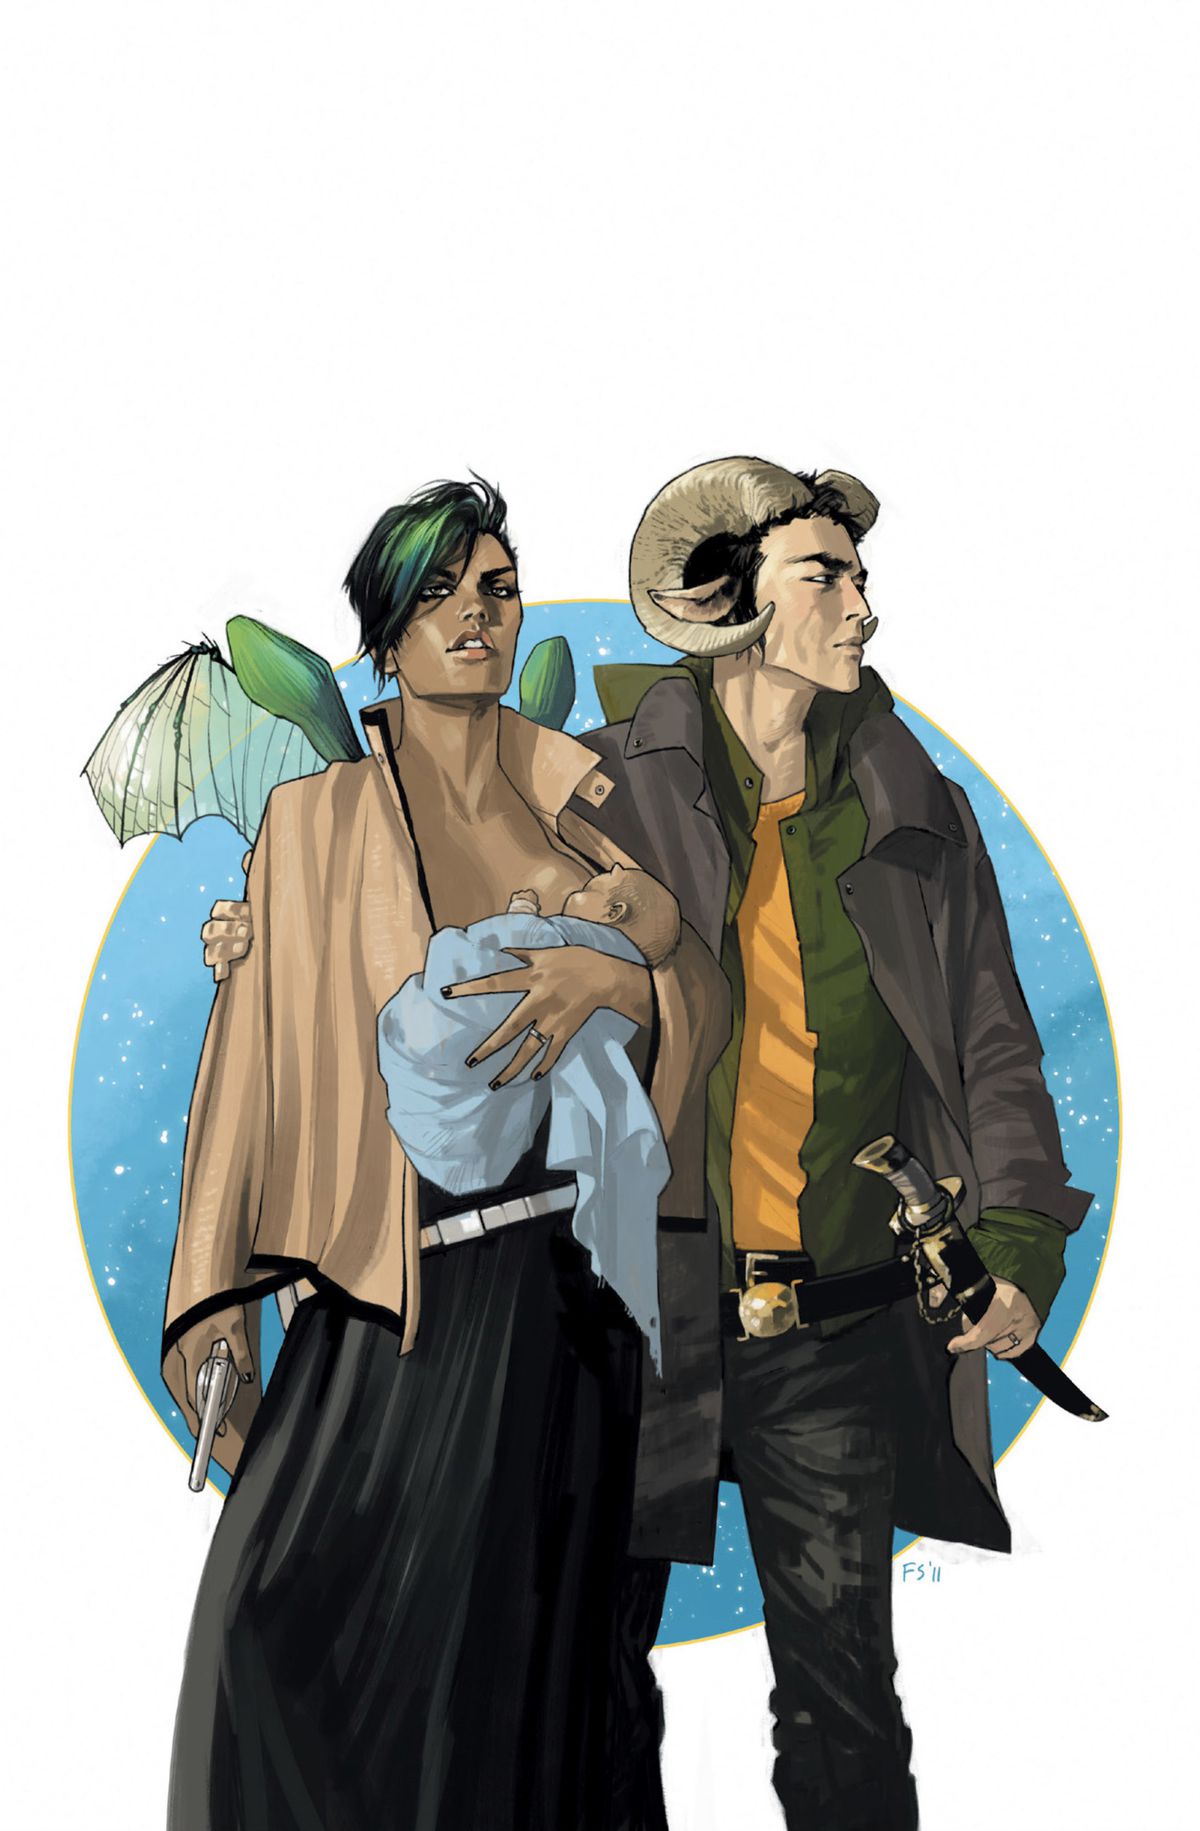 Alana and Marko, the respectively winged and horned heroes of Saga on the cover of Saga #1 (2012). Alana’s shirt is open as she breastfeeds their infant daughter Hazel with one hand and brandishes a pistol with the other. 